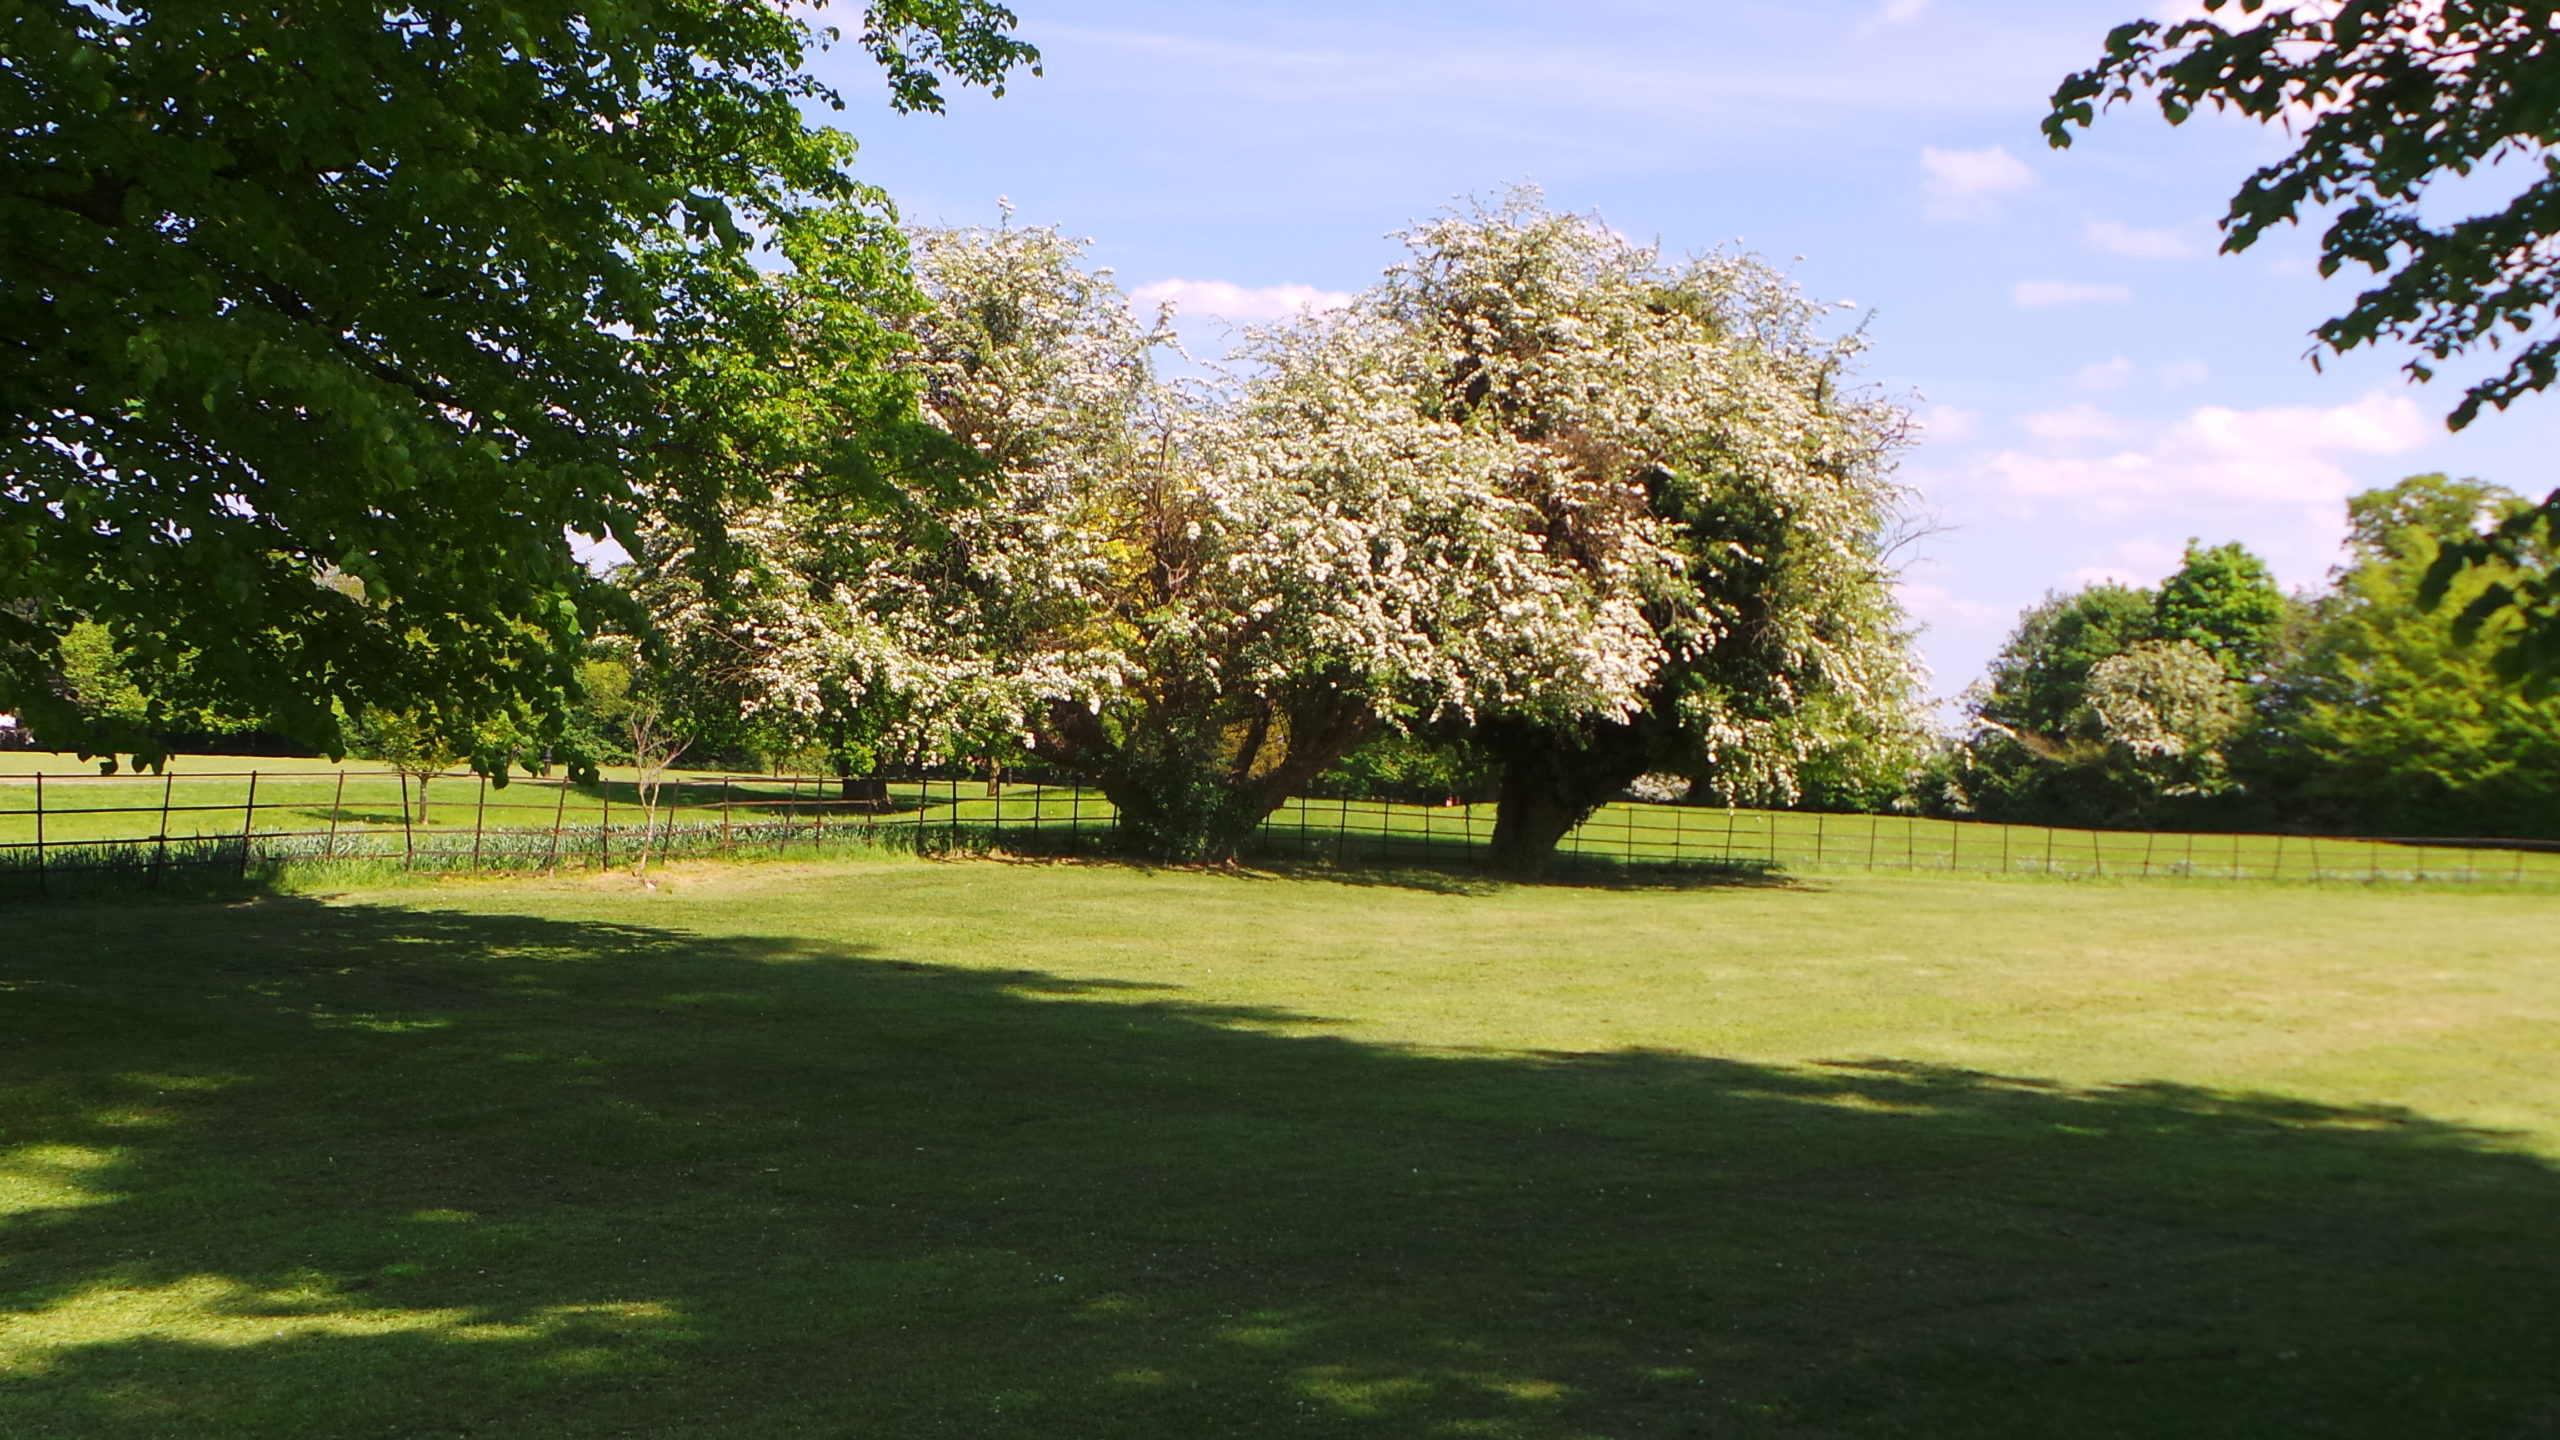 Looking across the Bourn Hall grounds